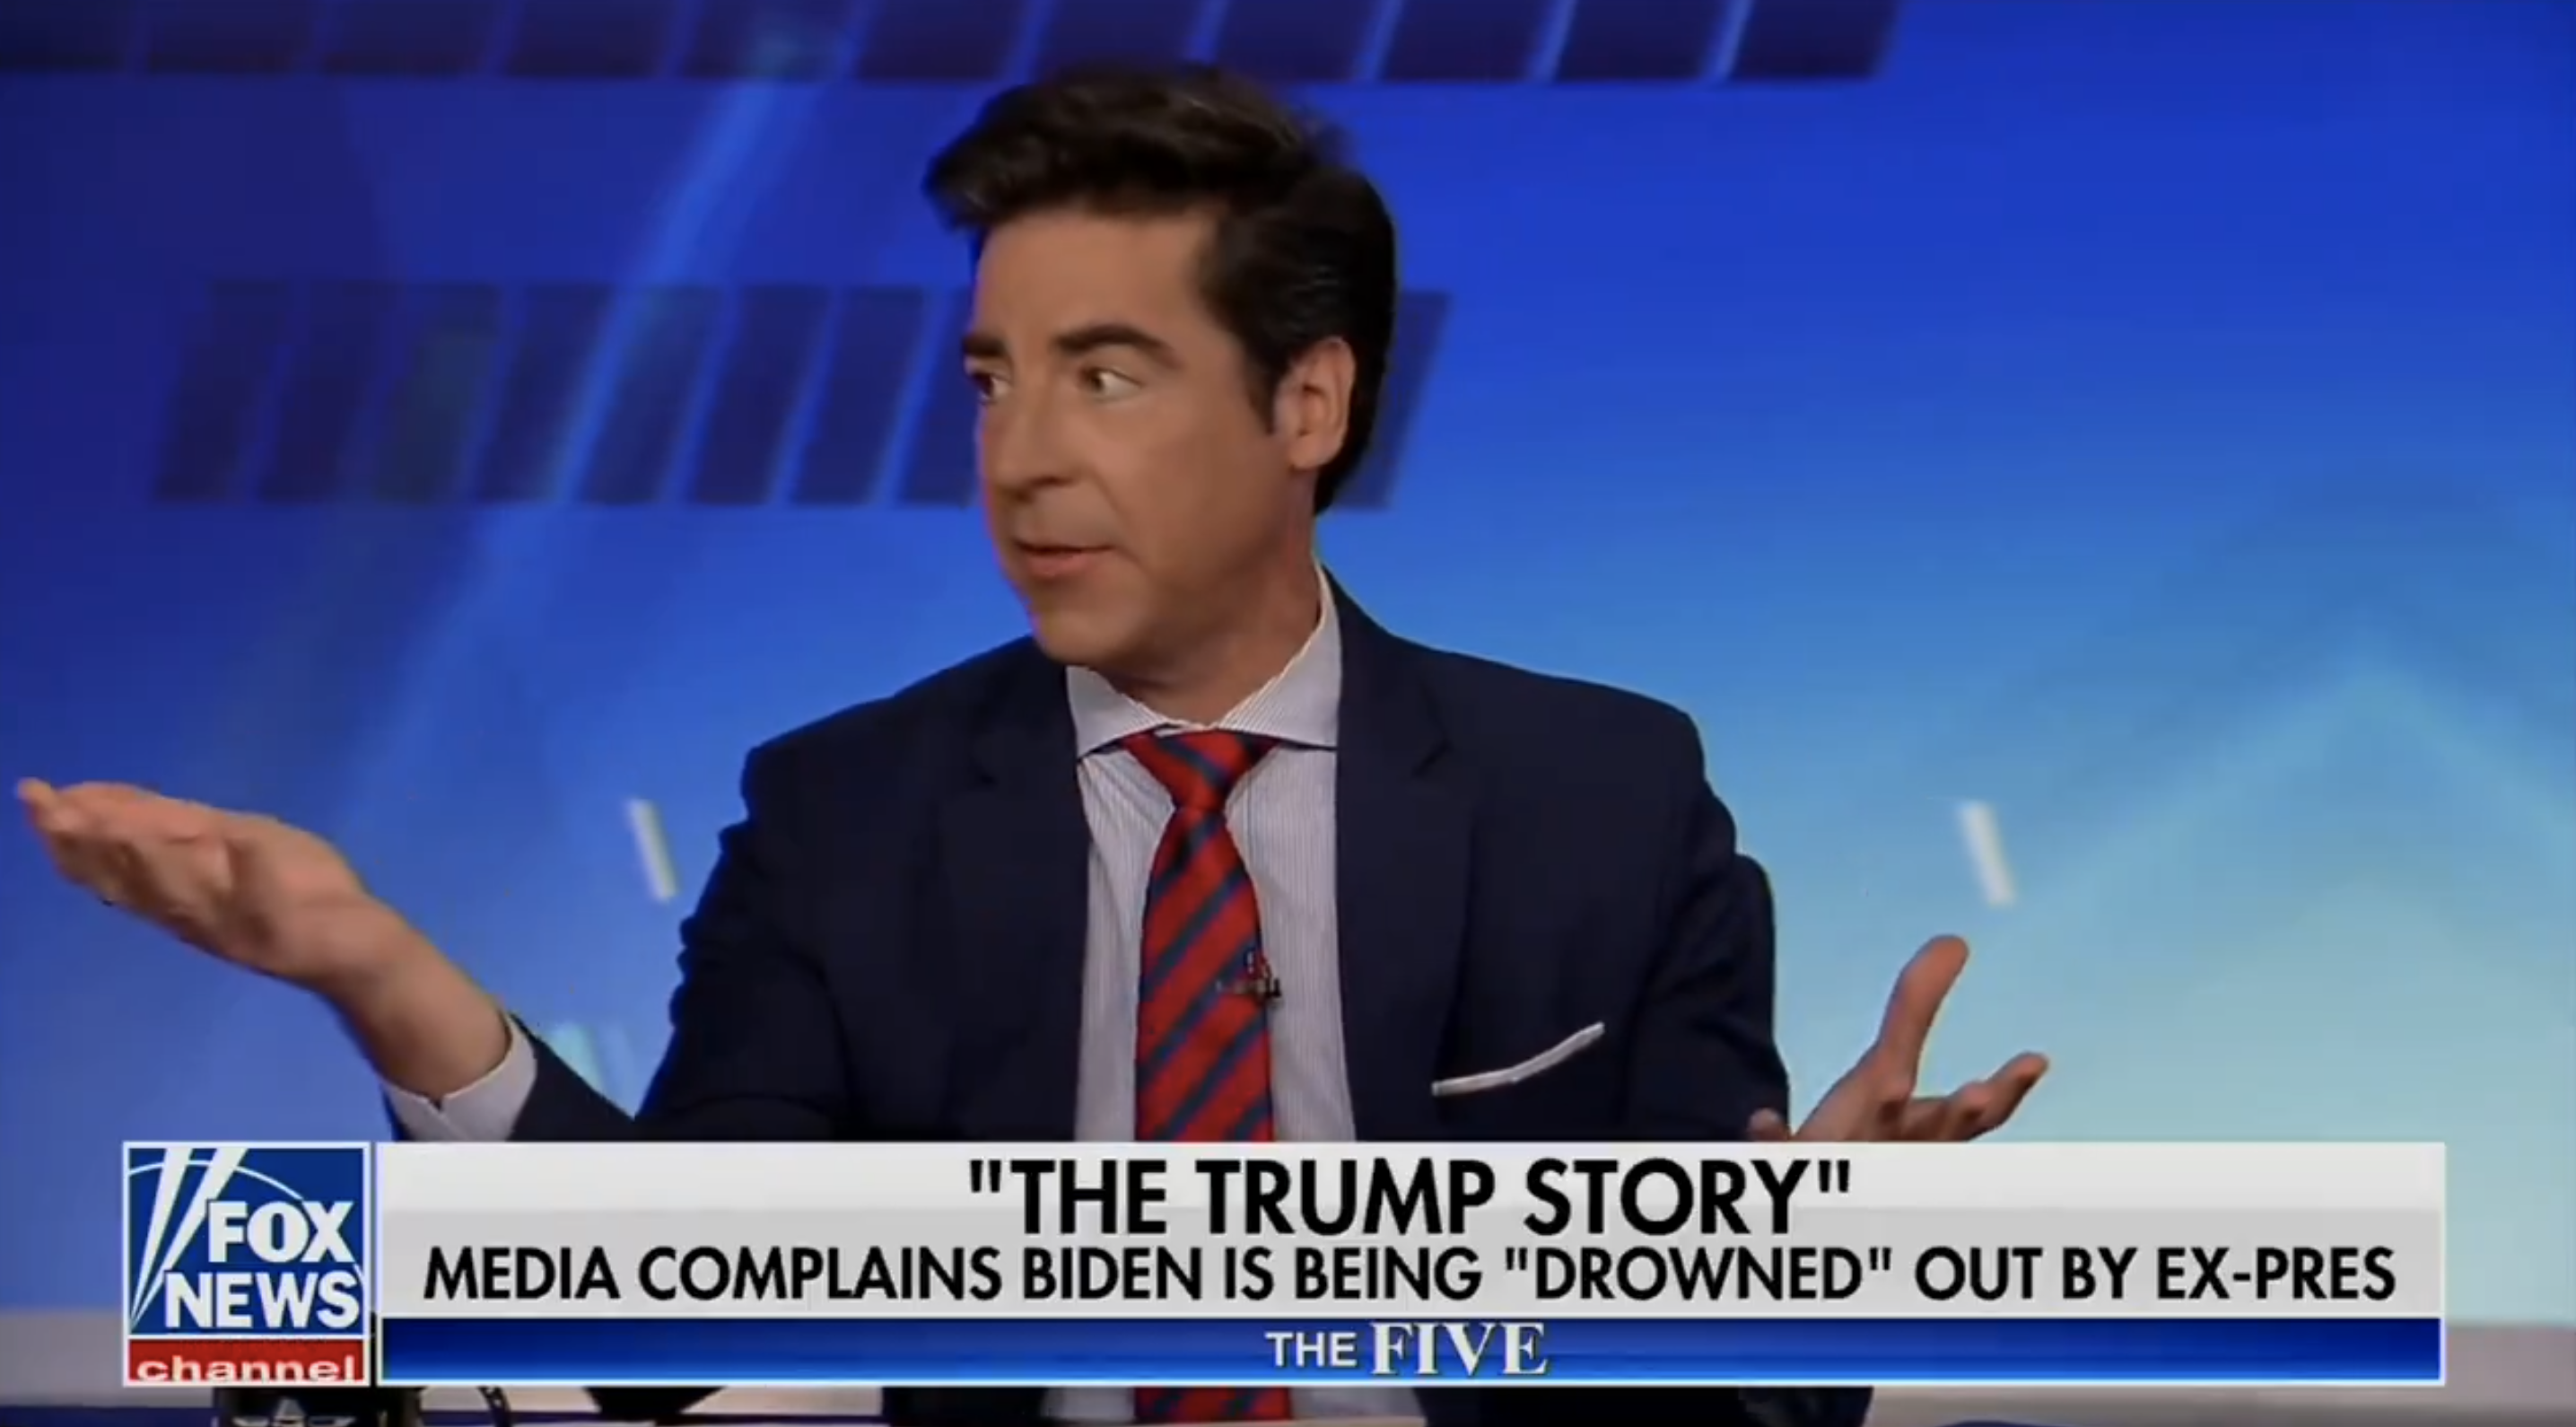 News anchor gestures during a broadcast segment titled &quot;THE TRUMP STORY&quot; on Fox News, discussing media complaints about Biden coverage